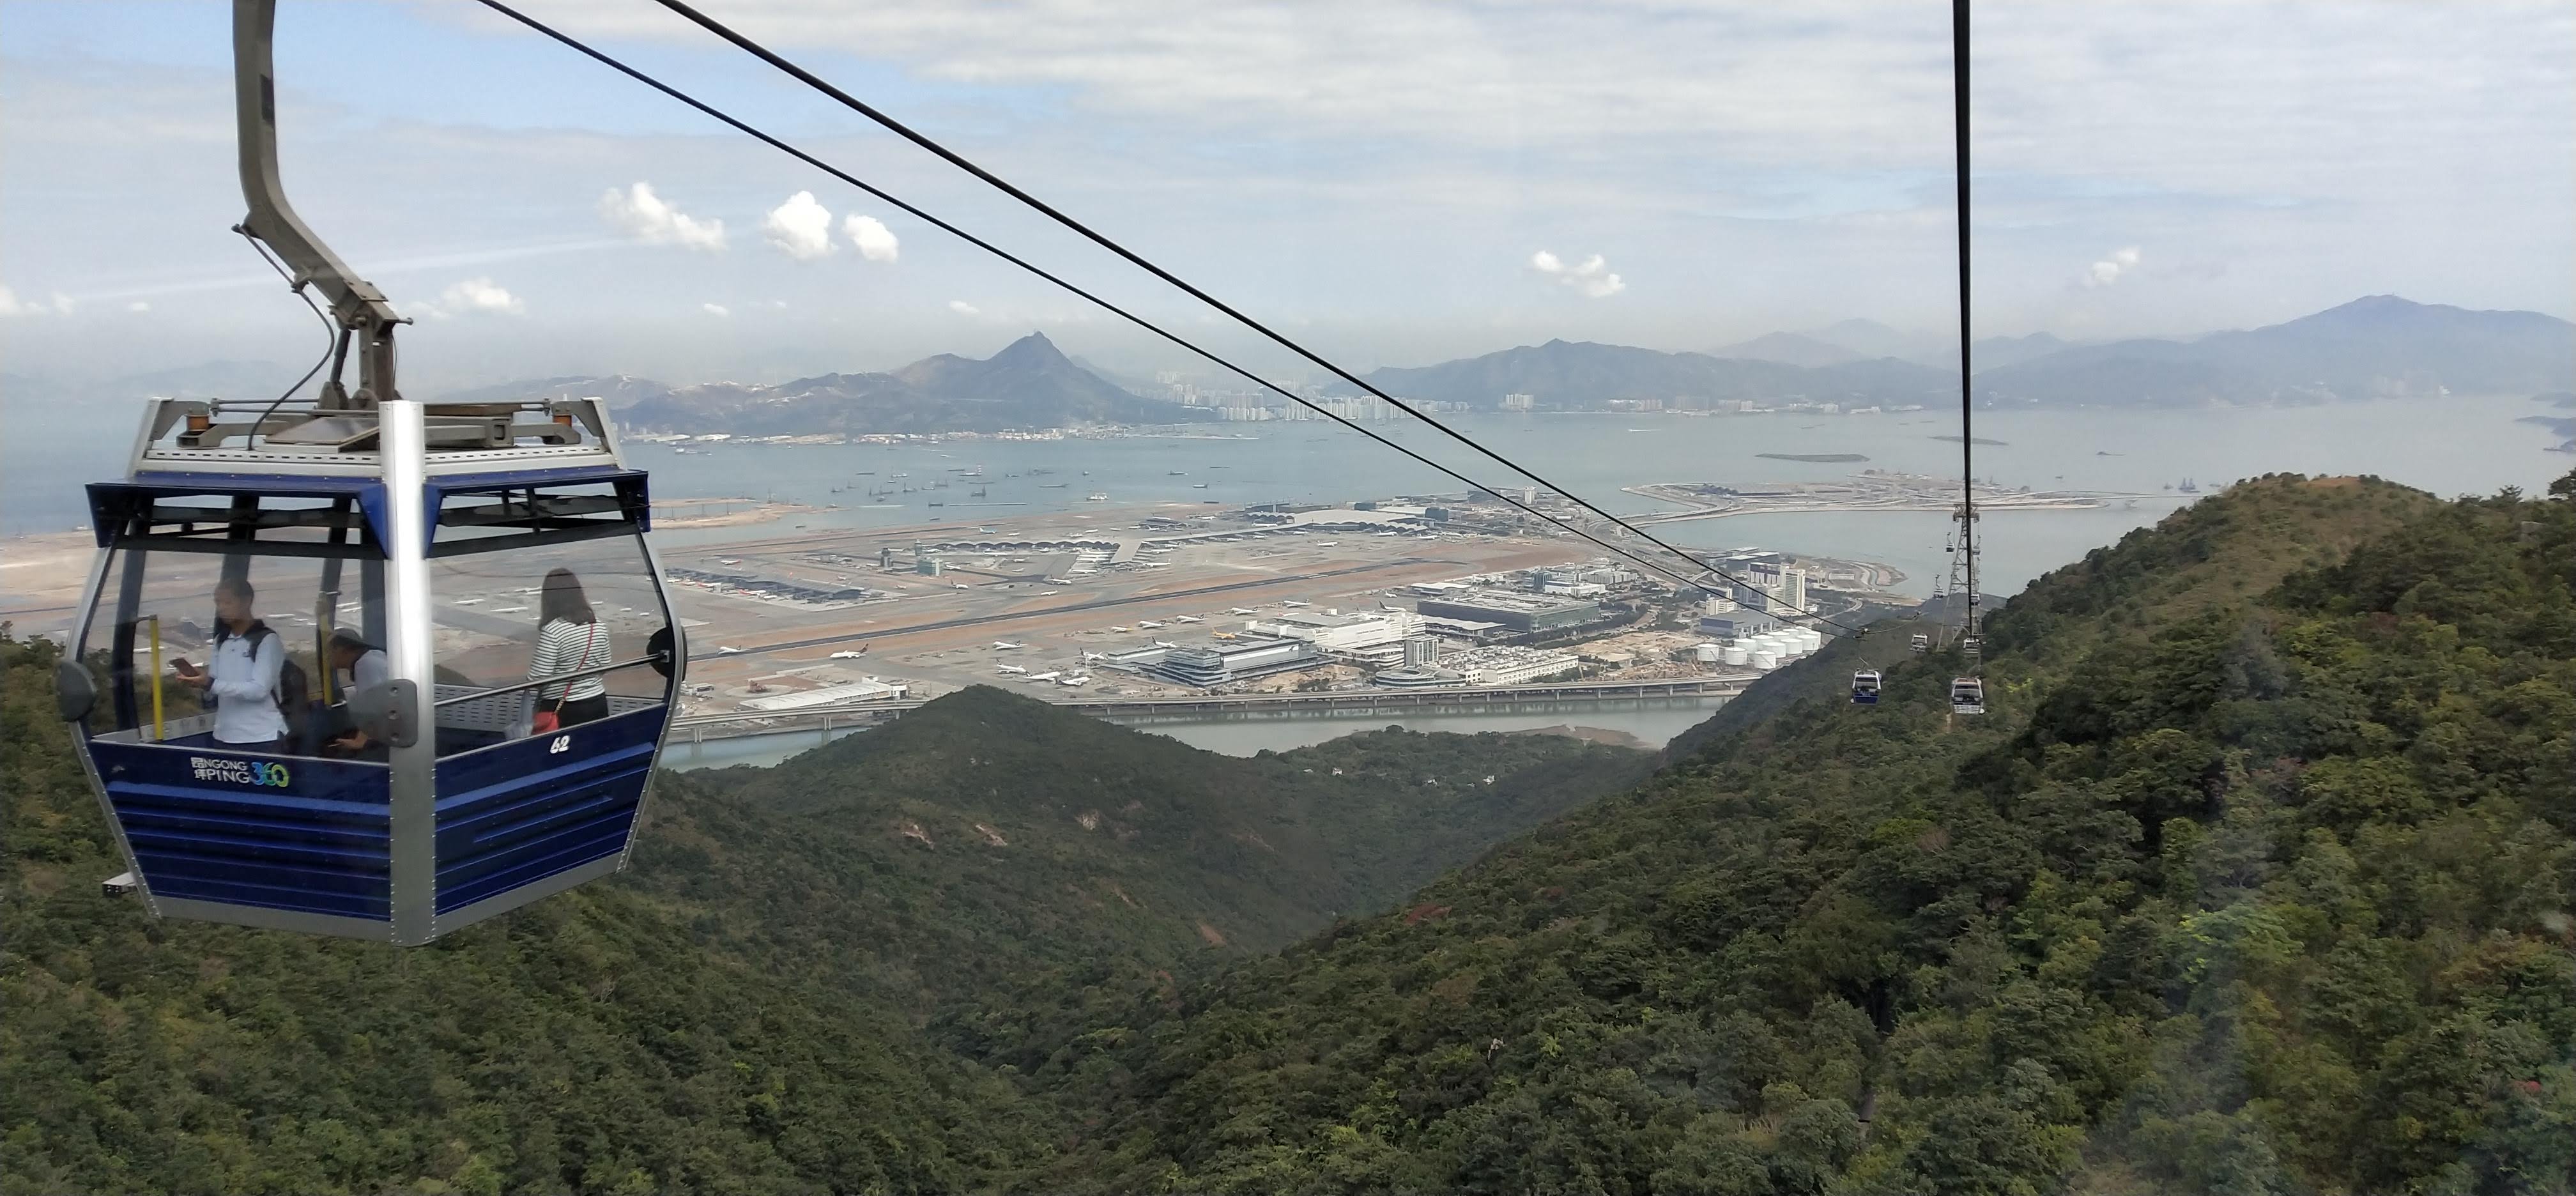 You can enjoy the great view during the Ngong Ping 360 Cable Car ride in Frank's Lantau private tour.